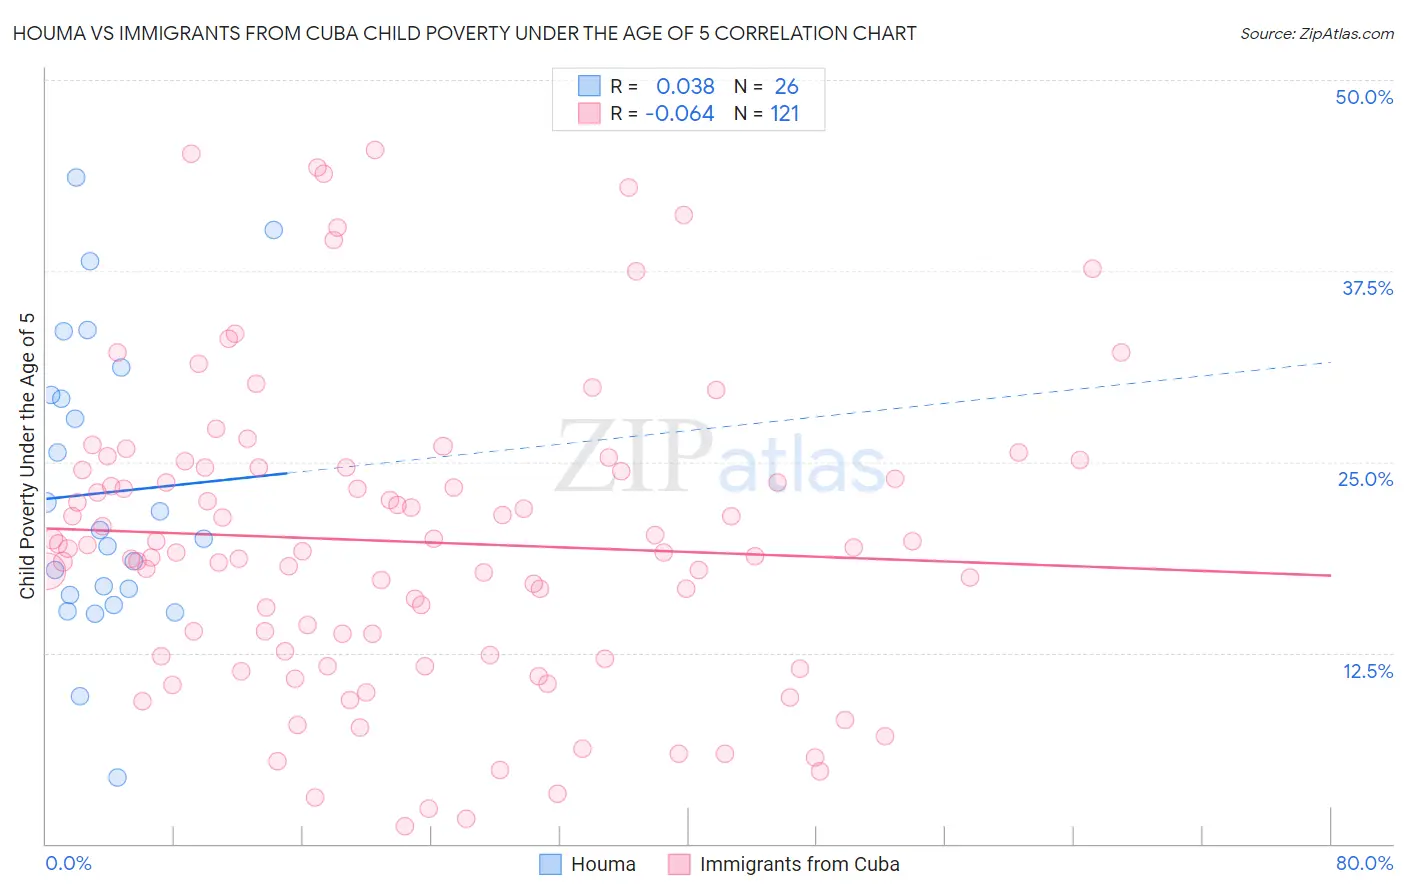 Houma vs Immigrants from Cuba Child Poverty Under the Age of 5